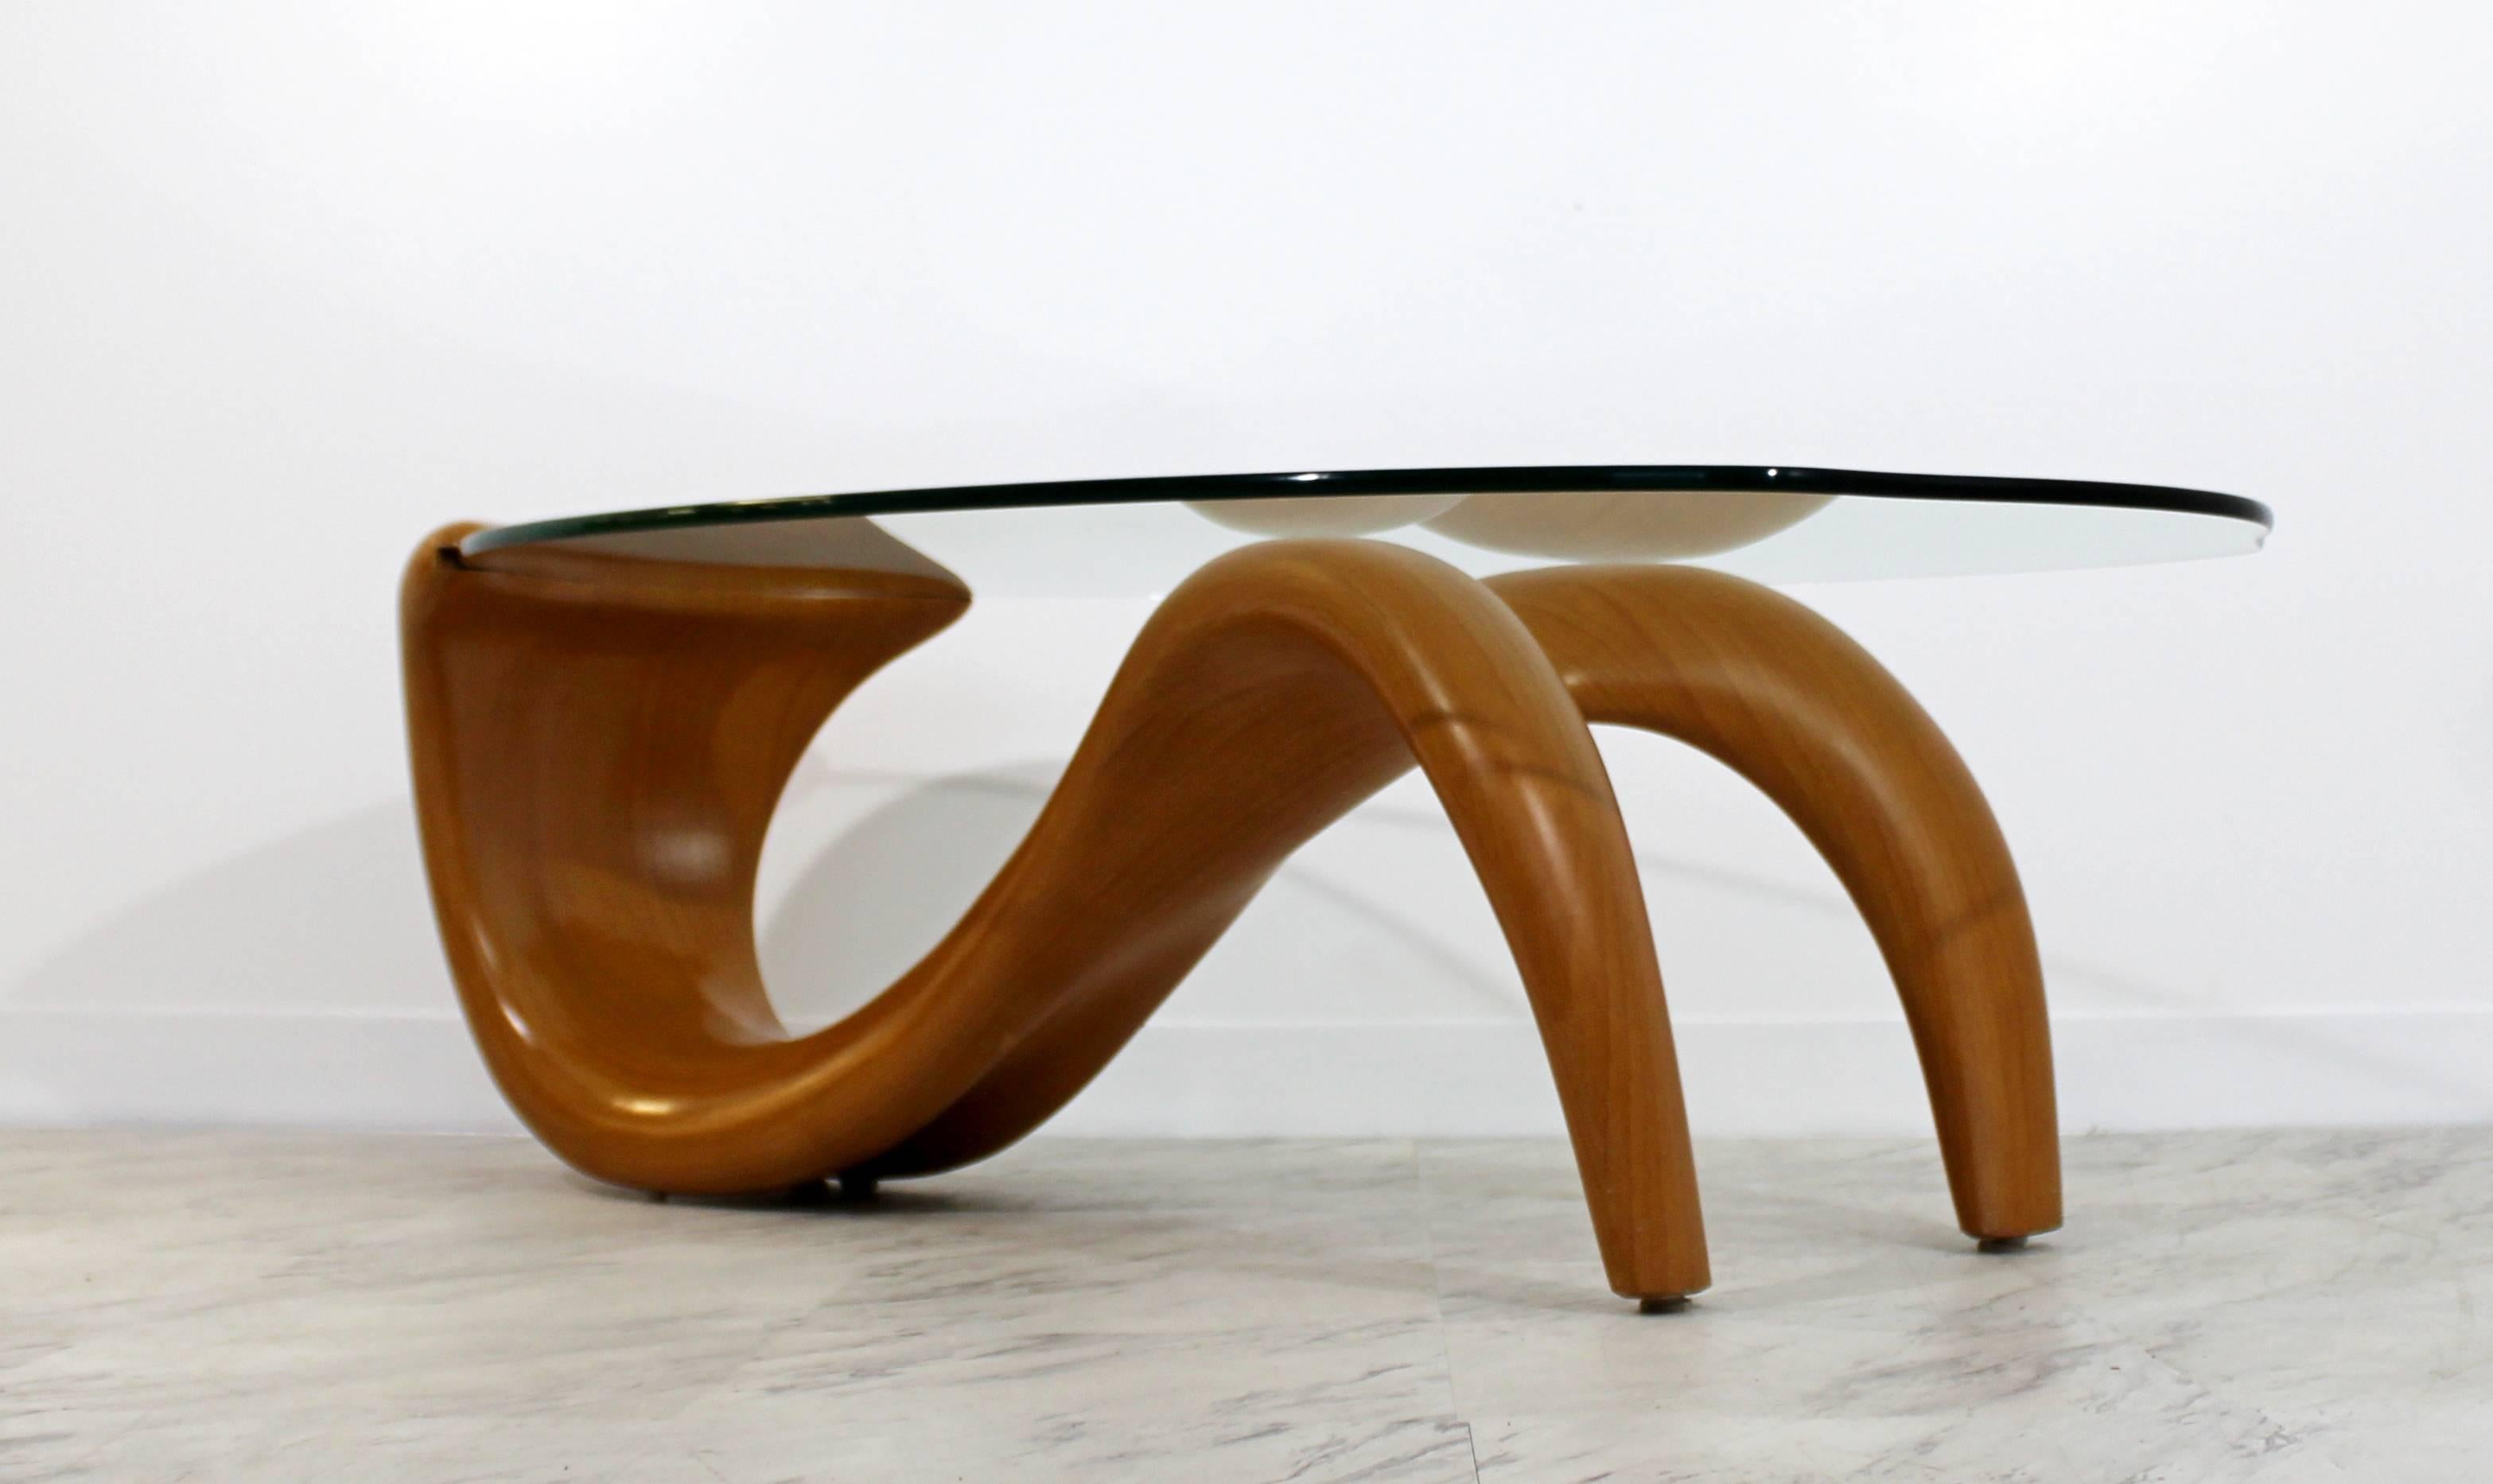 For your consideration is a magnificent, super rare, biomorphic or organically shaped coffee table, made of bentwood and glass, circa 1970s. In excellent condition. The dimensions are 49